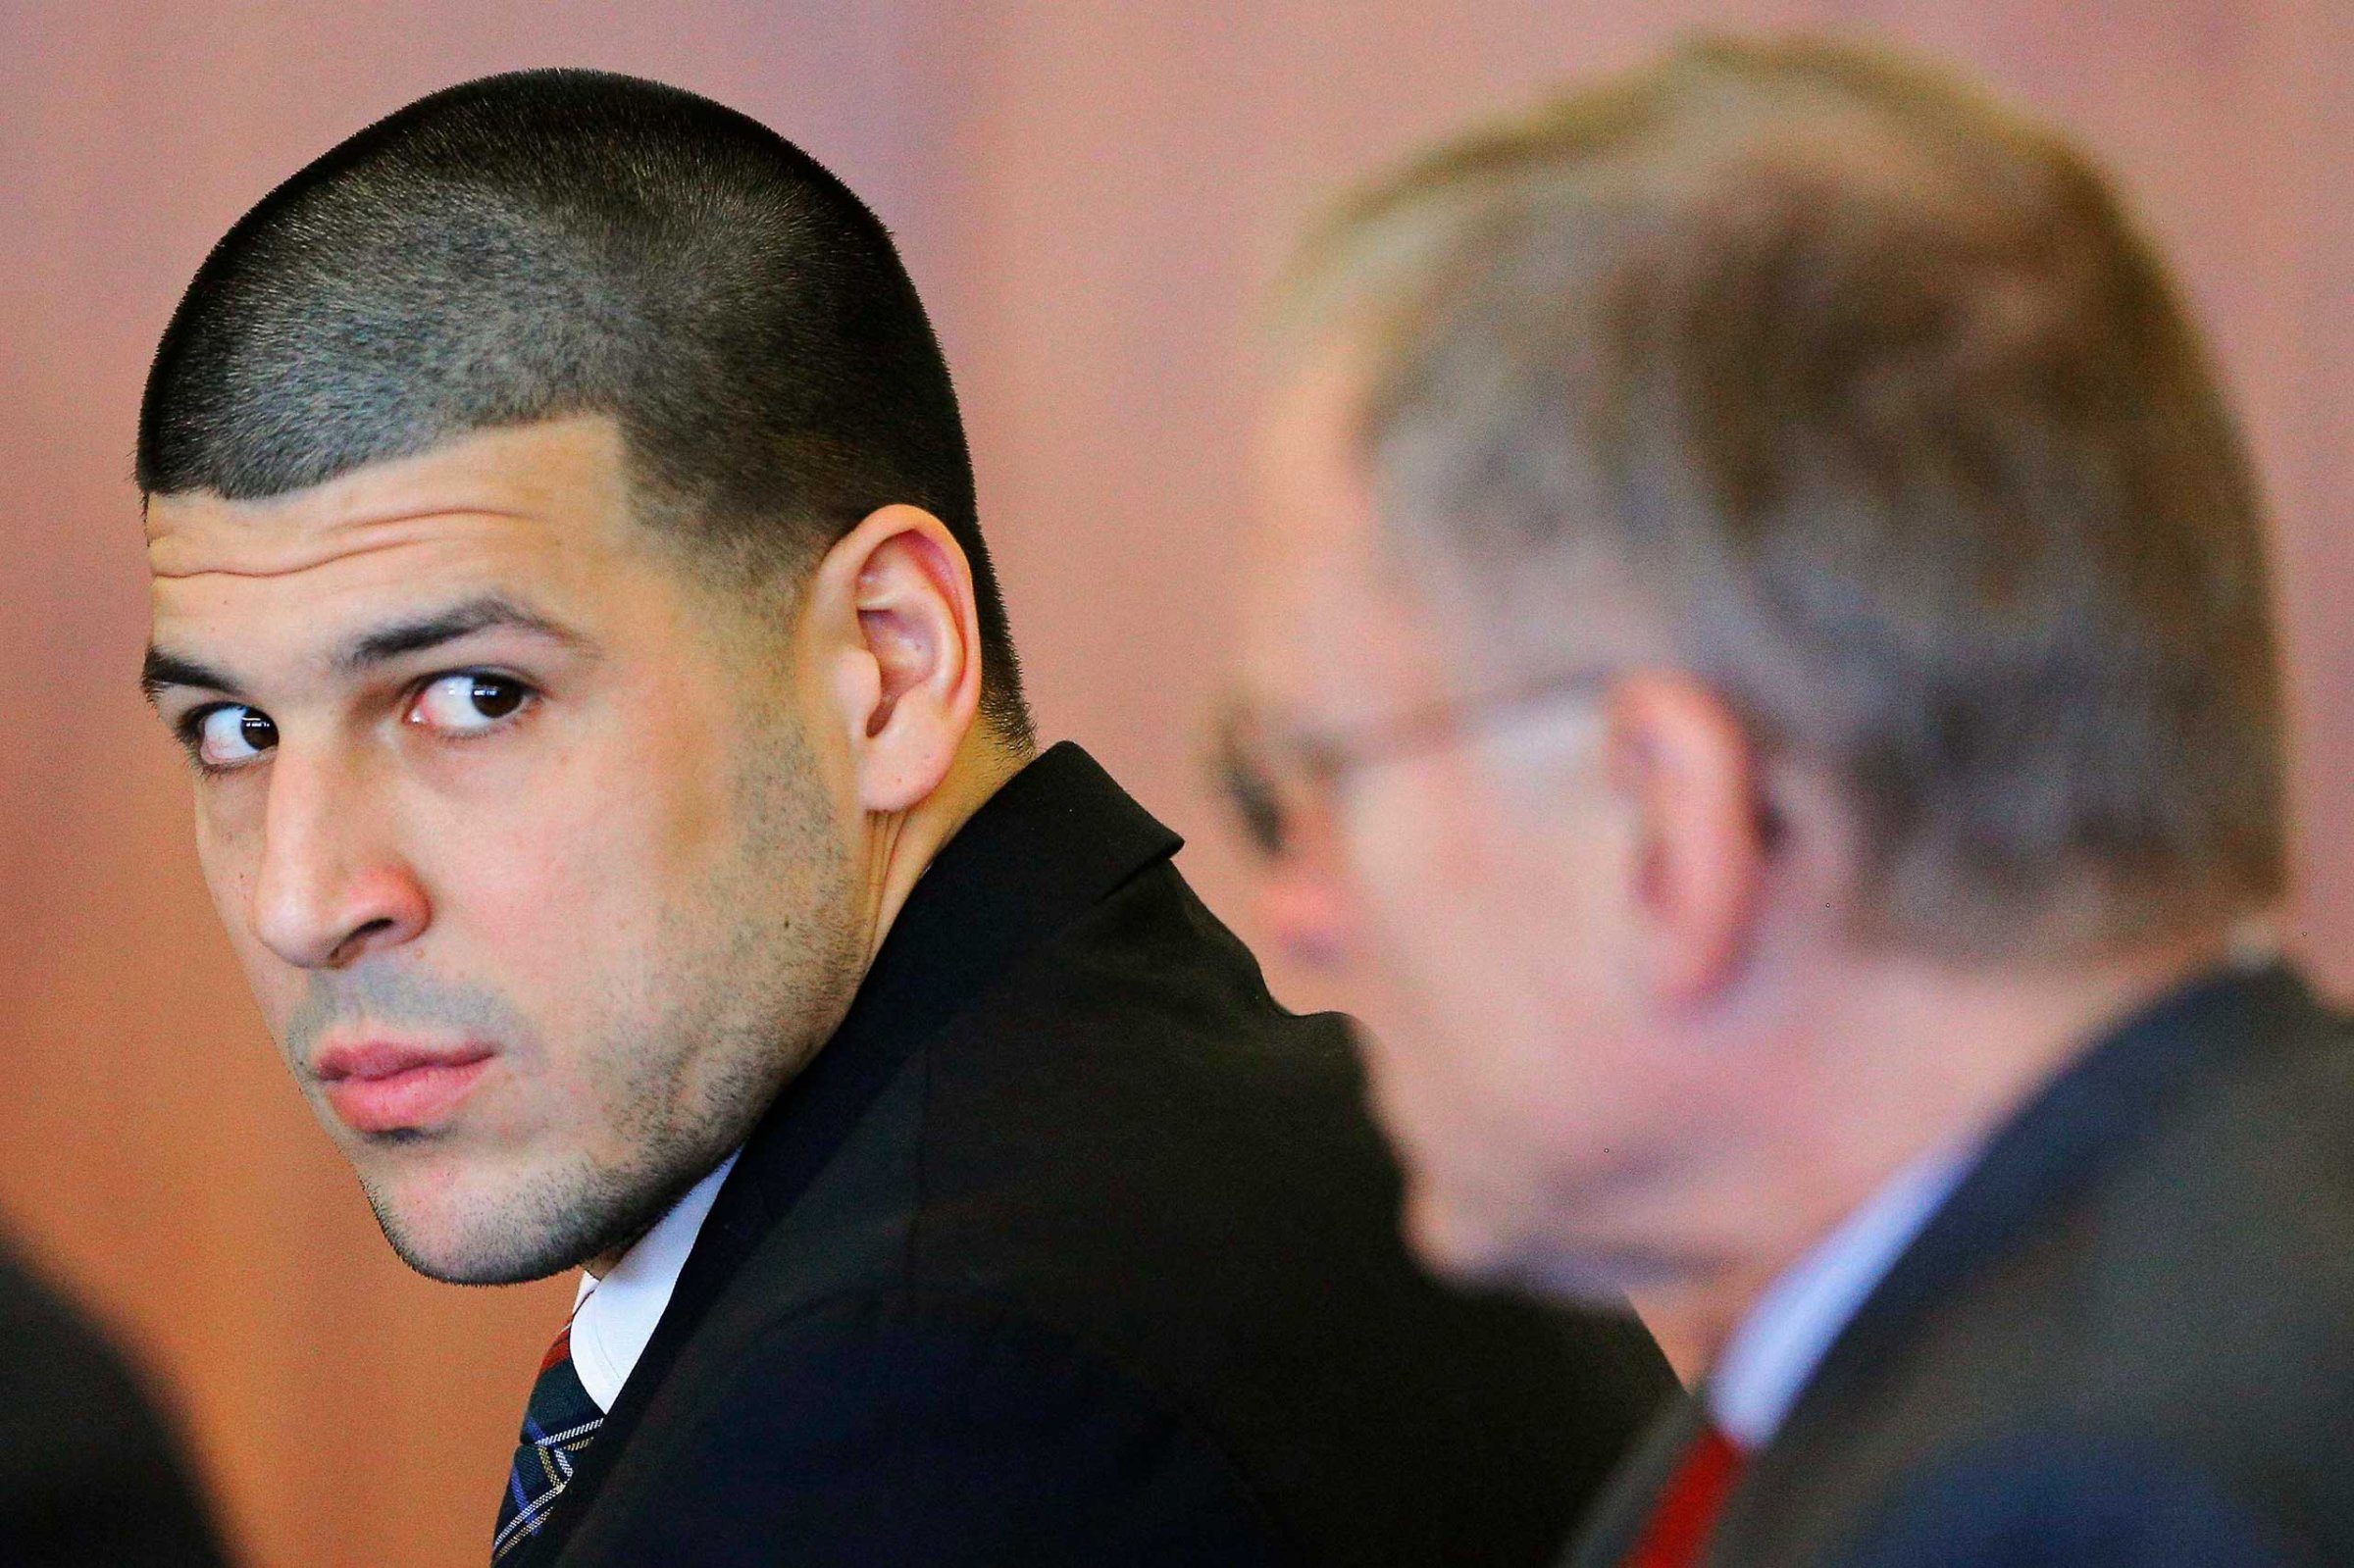 Former New England Patriots tight end Aaron Hernandez attends a pre-trial hearing in Fall River, Massachusetts Dec. 22, 2014.